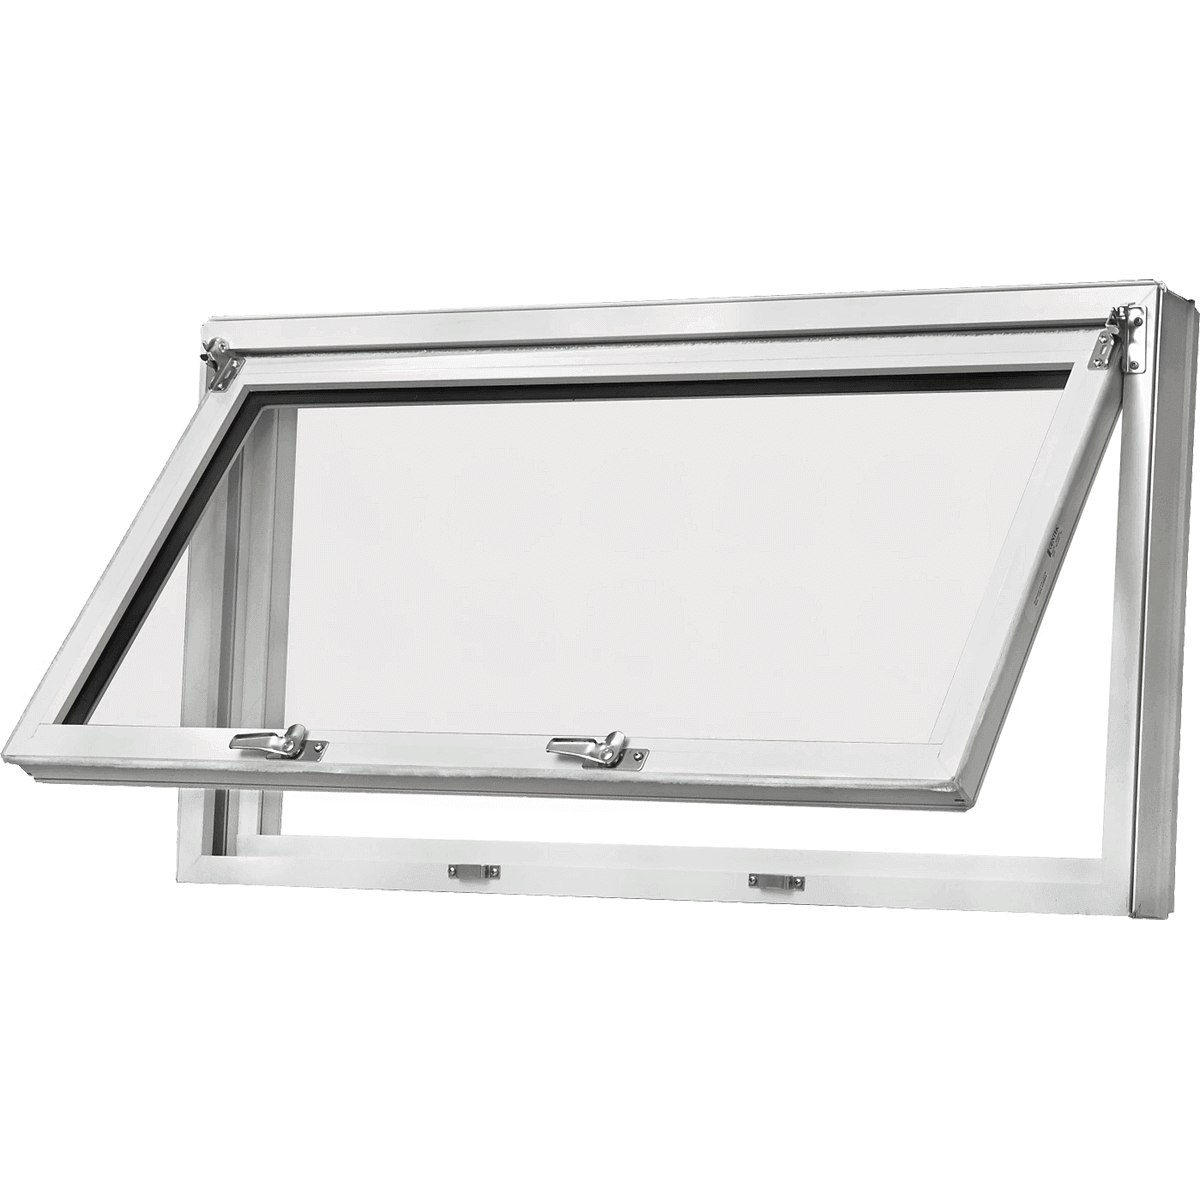 Basement windows are designed for below-grade applications and provide ventilation and natural light. Hopper windows are hinged at the bottom and open inward for easy cleaning and ventilation.